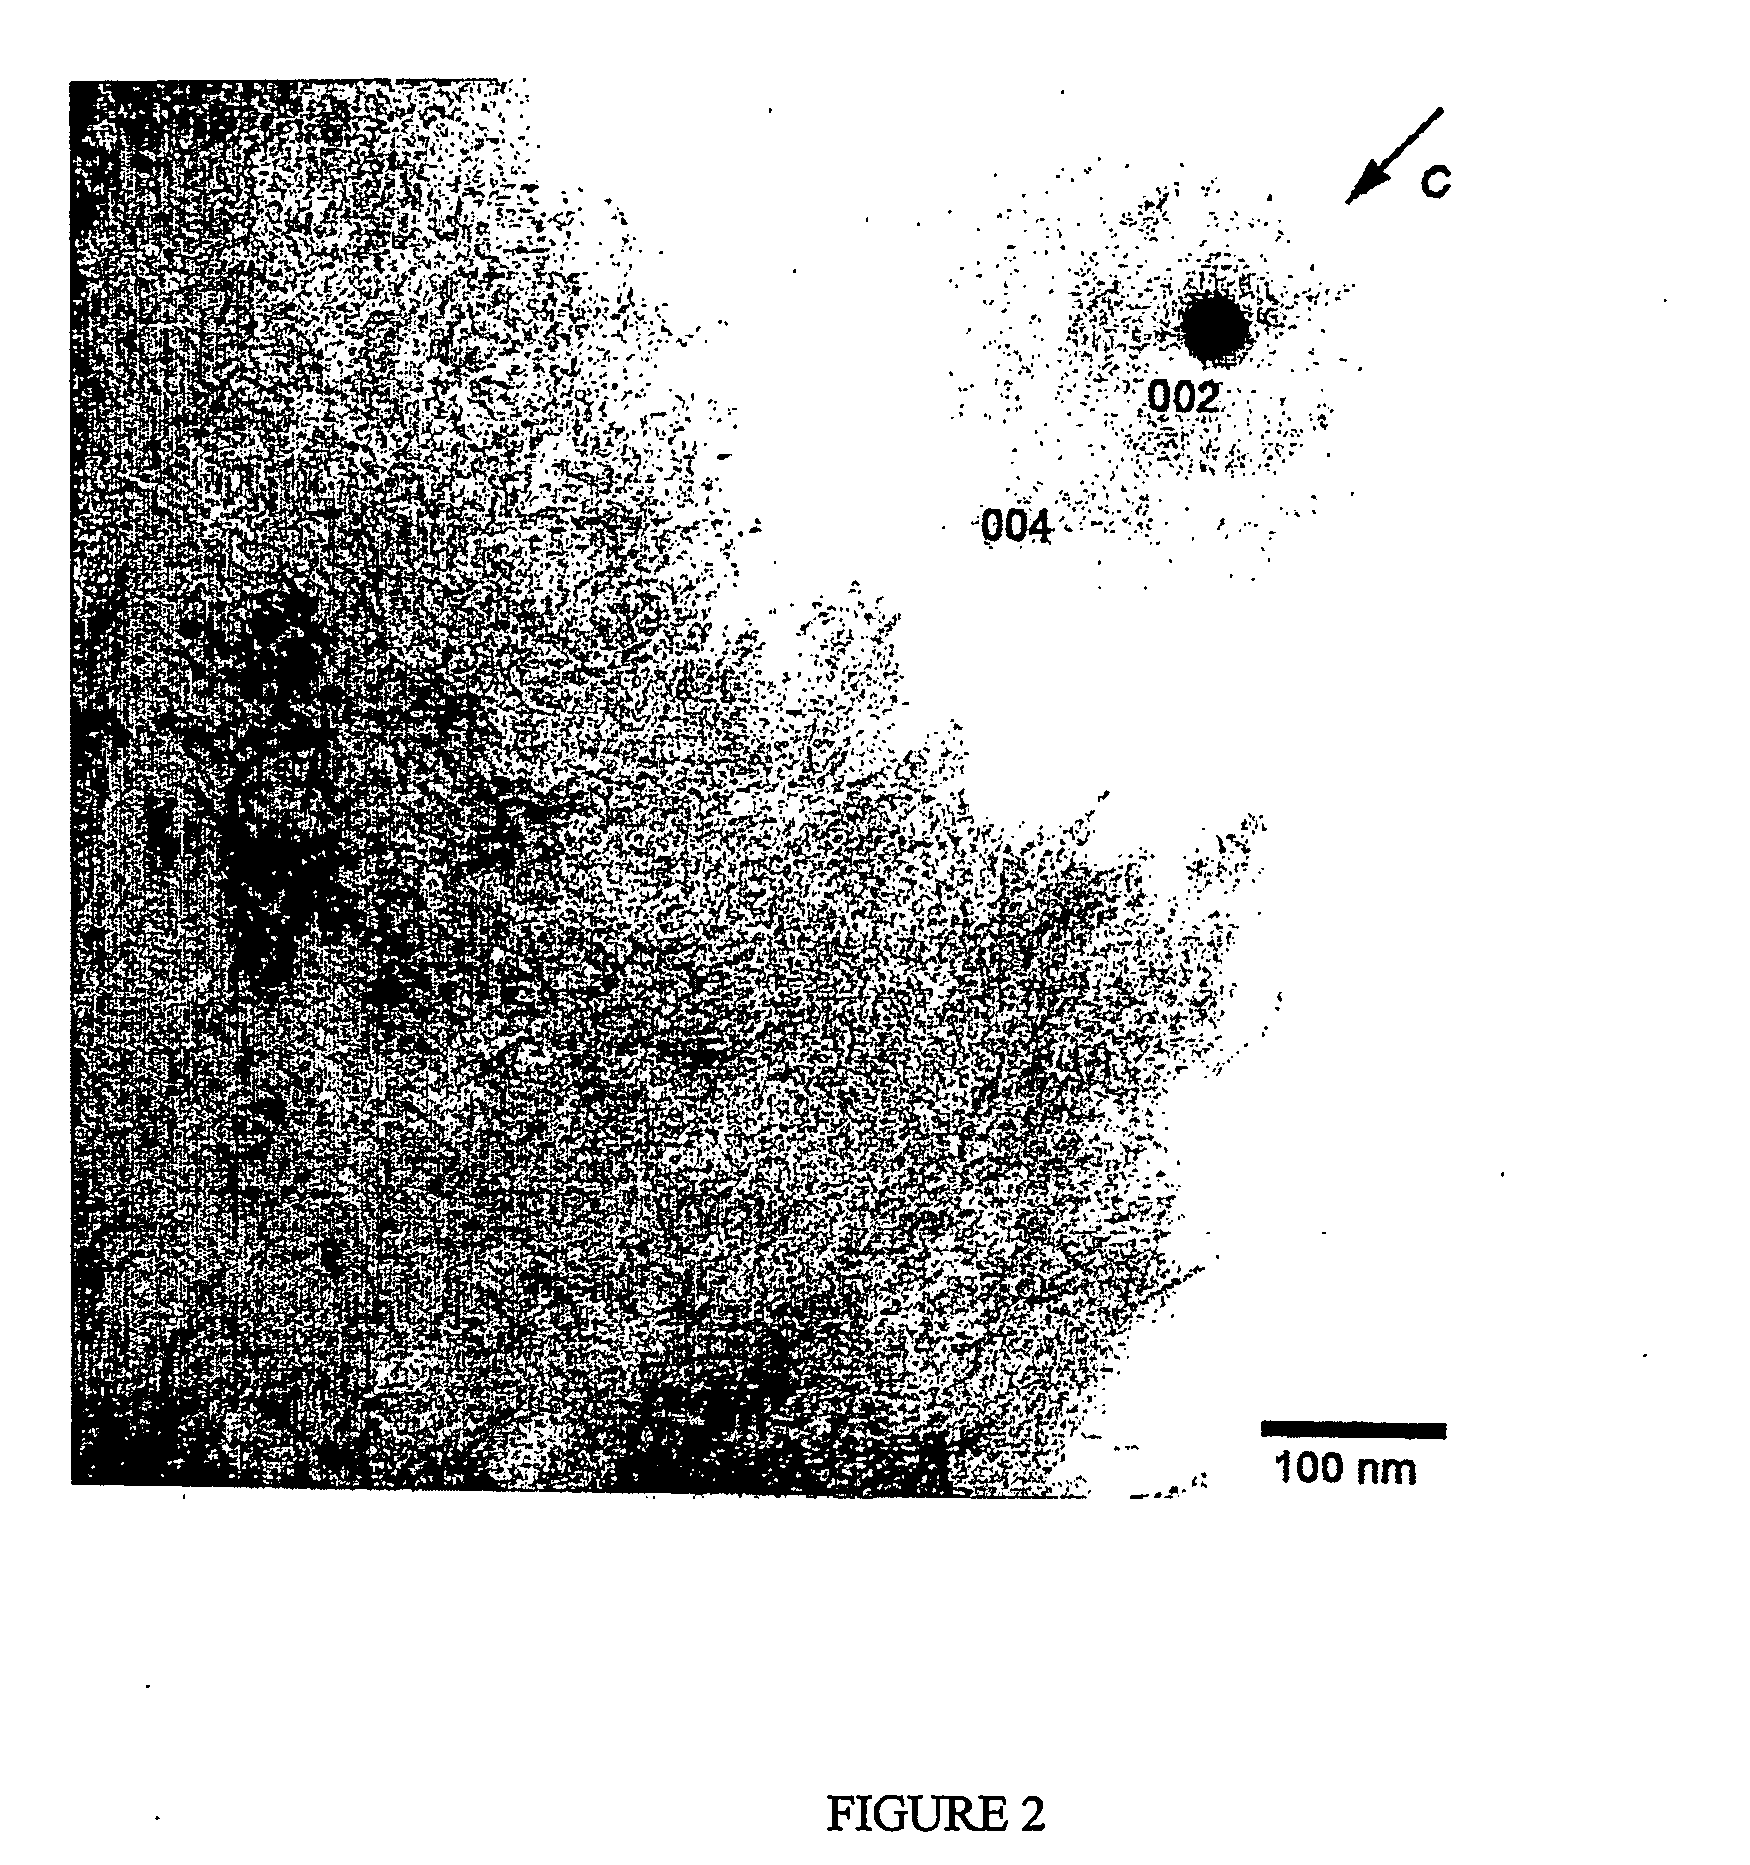 Composition and method for self-assembly and mineralizatin of peptide amphiphiles